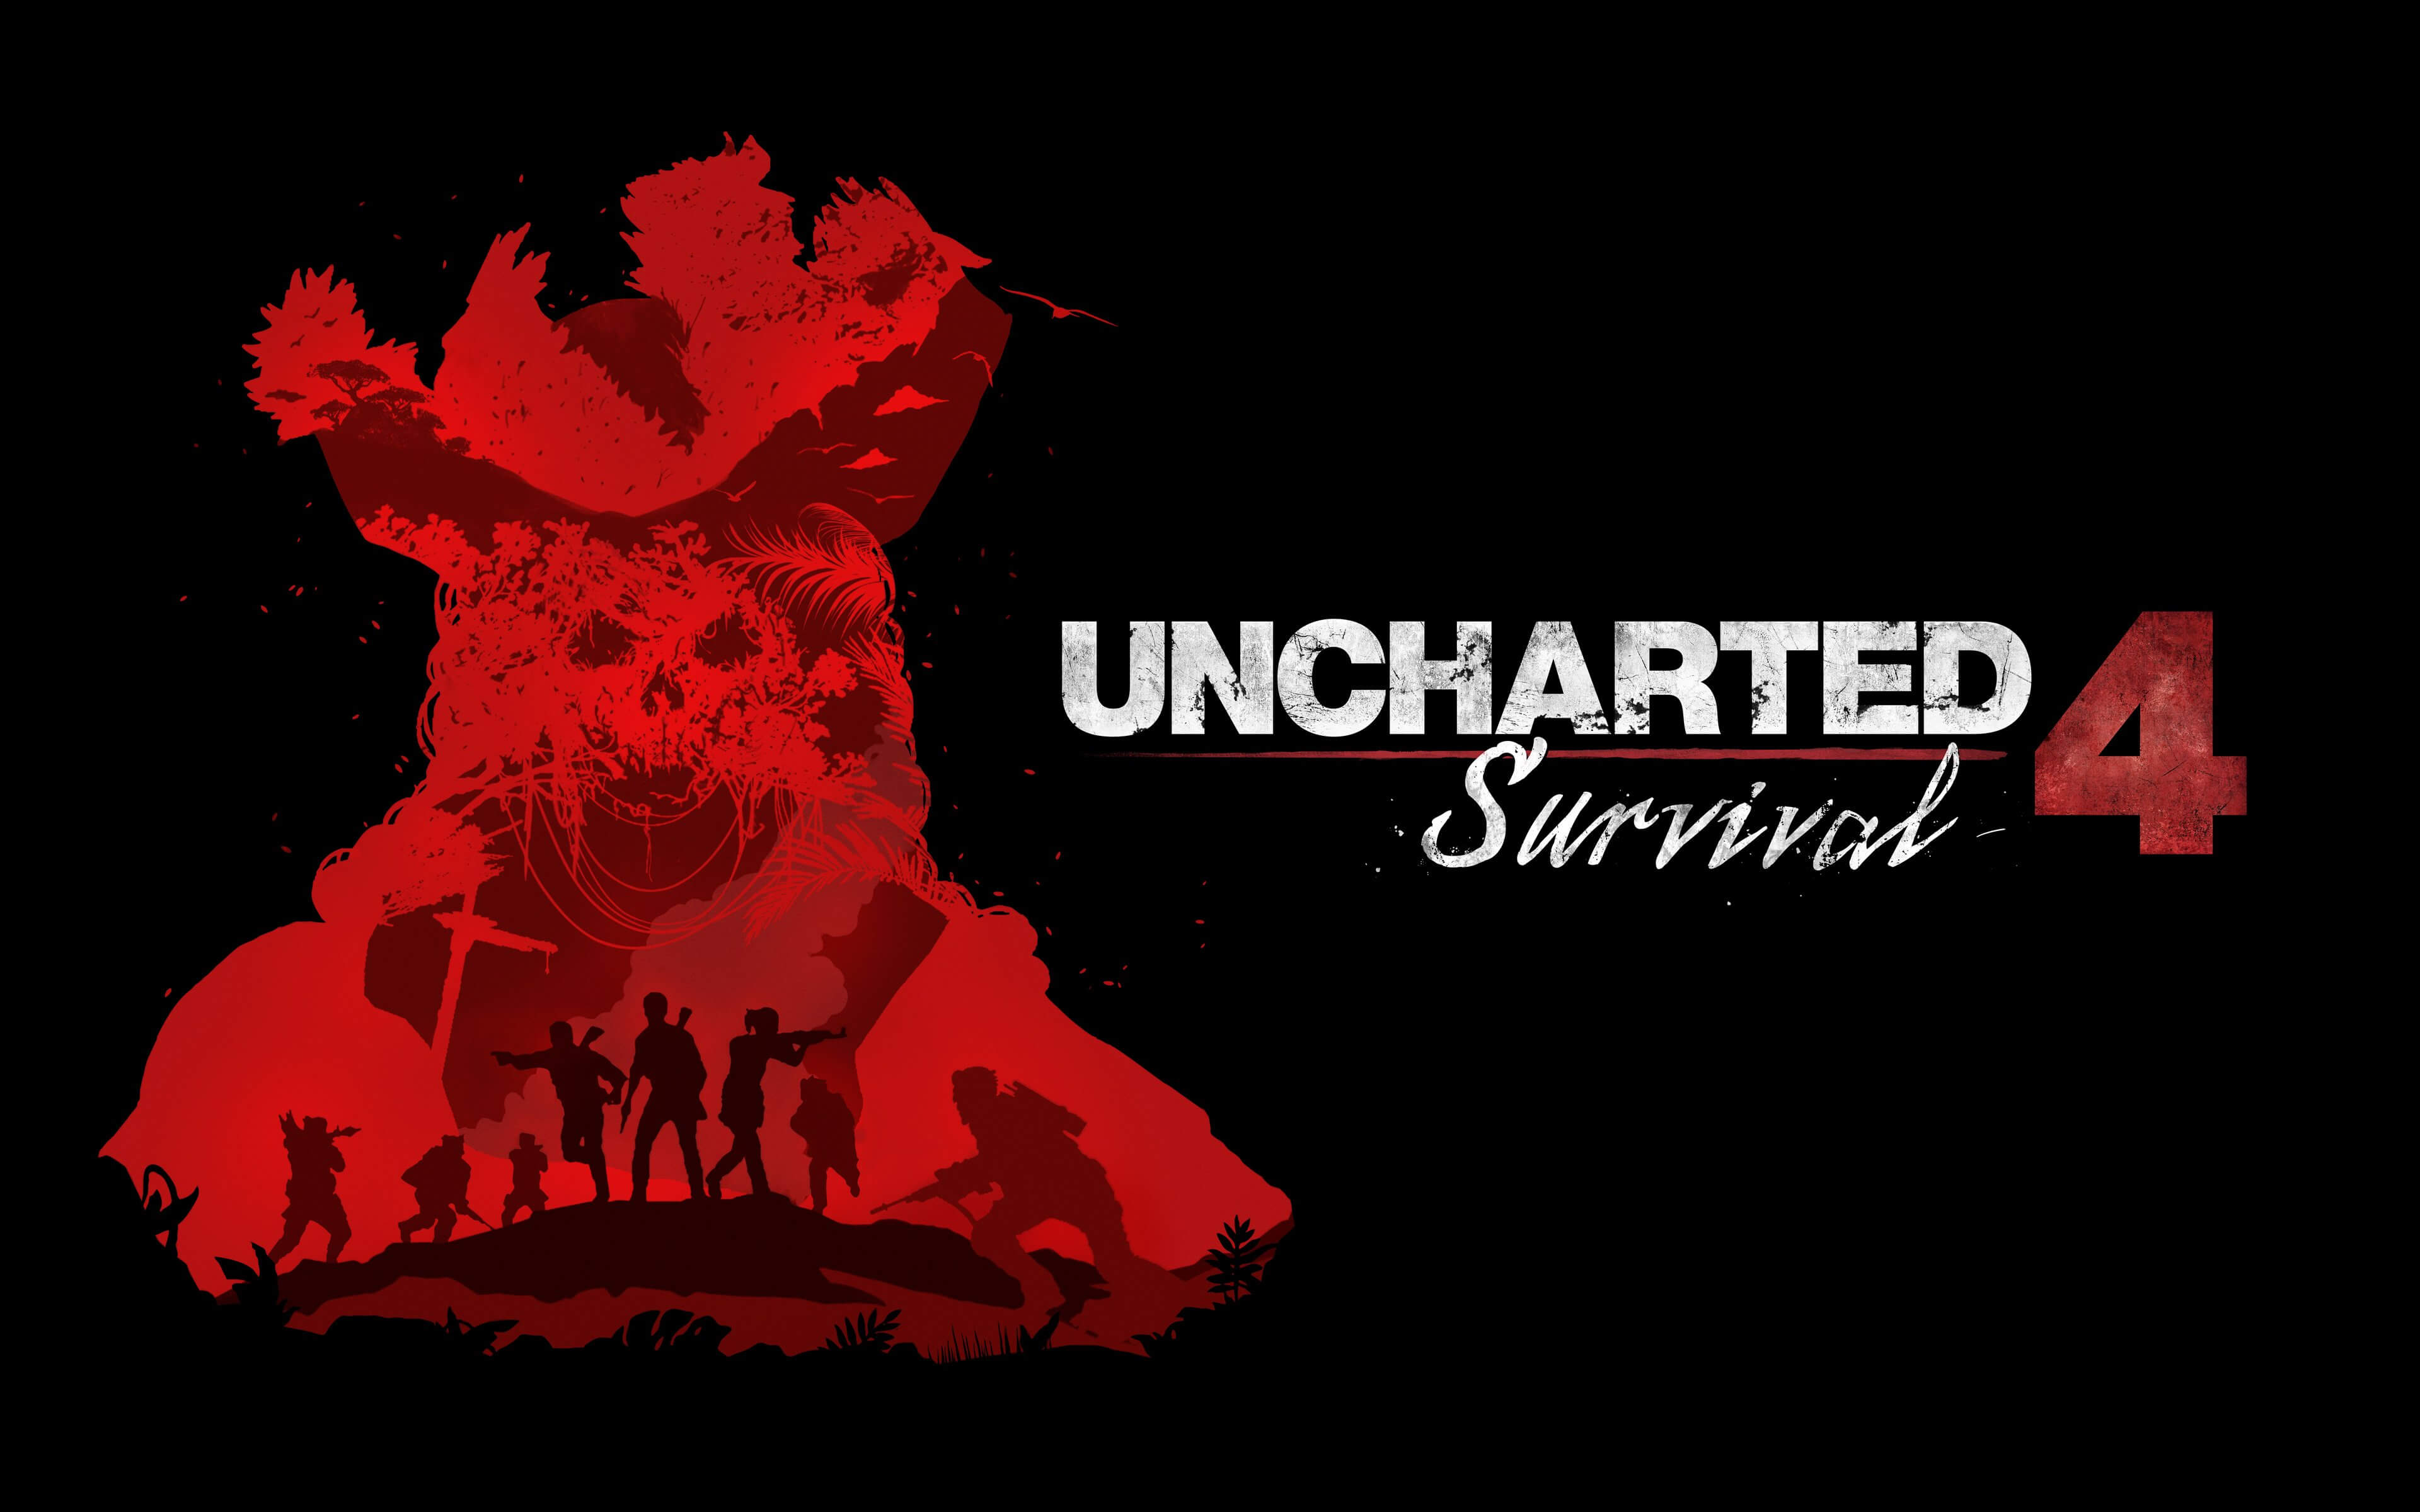 Uncharted 4 A Thief's End Survival 4K Wallpaper • GamePhD